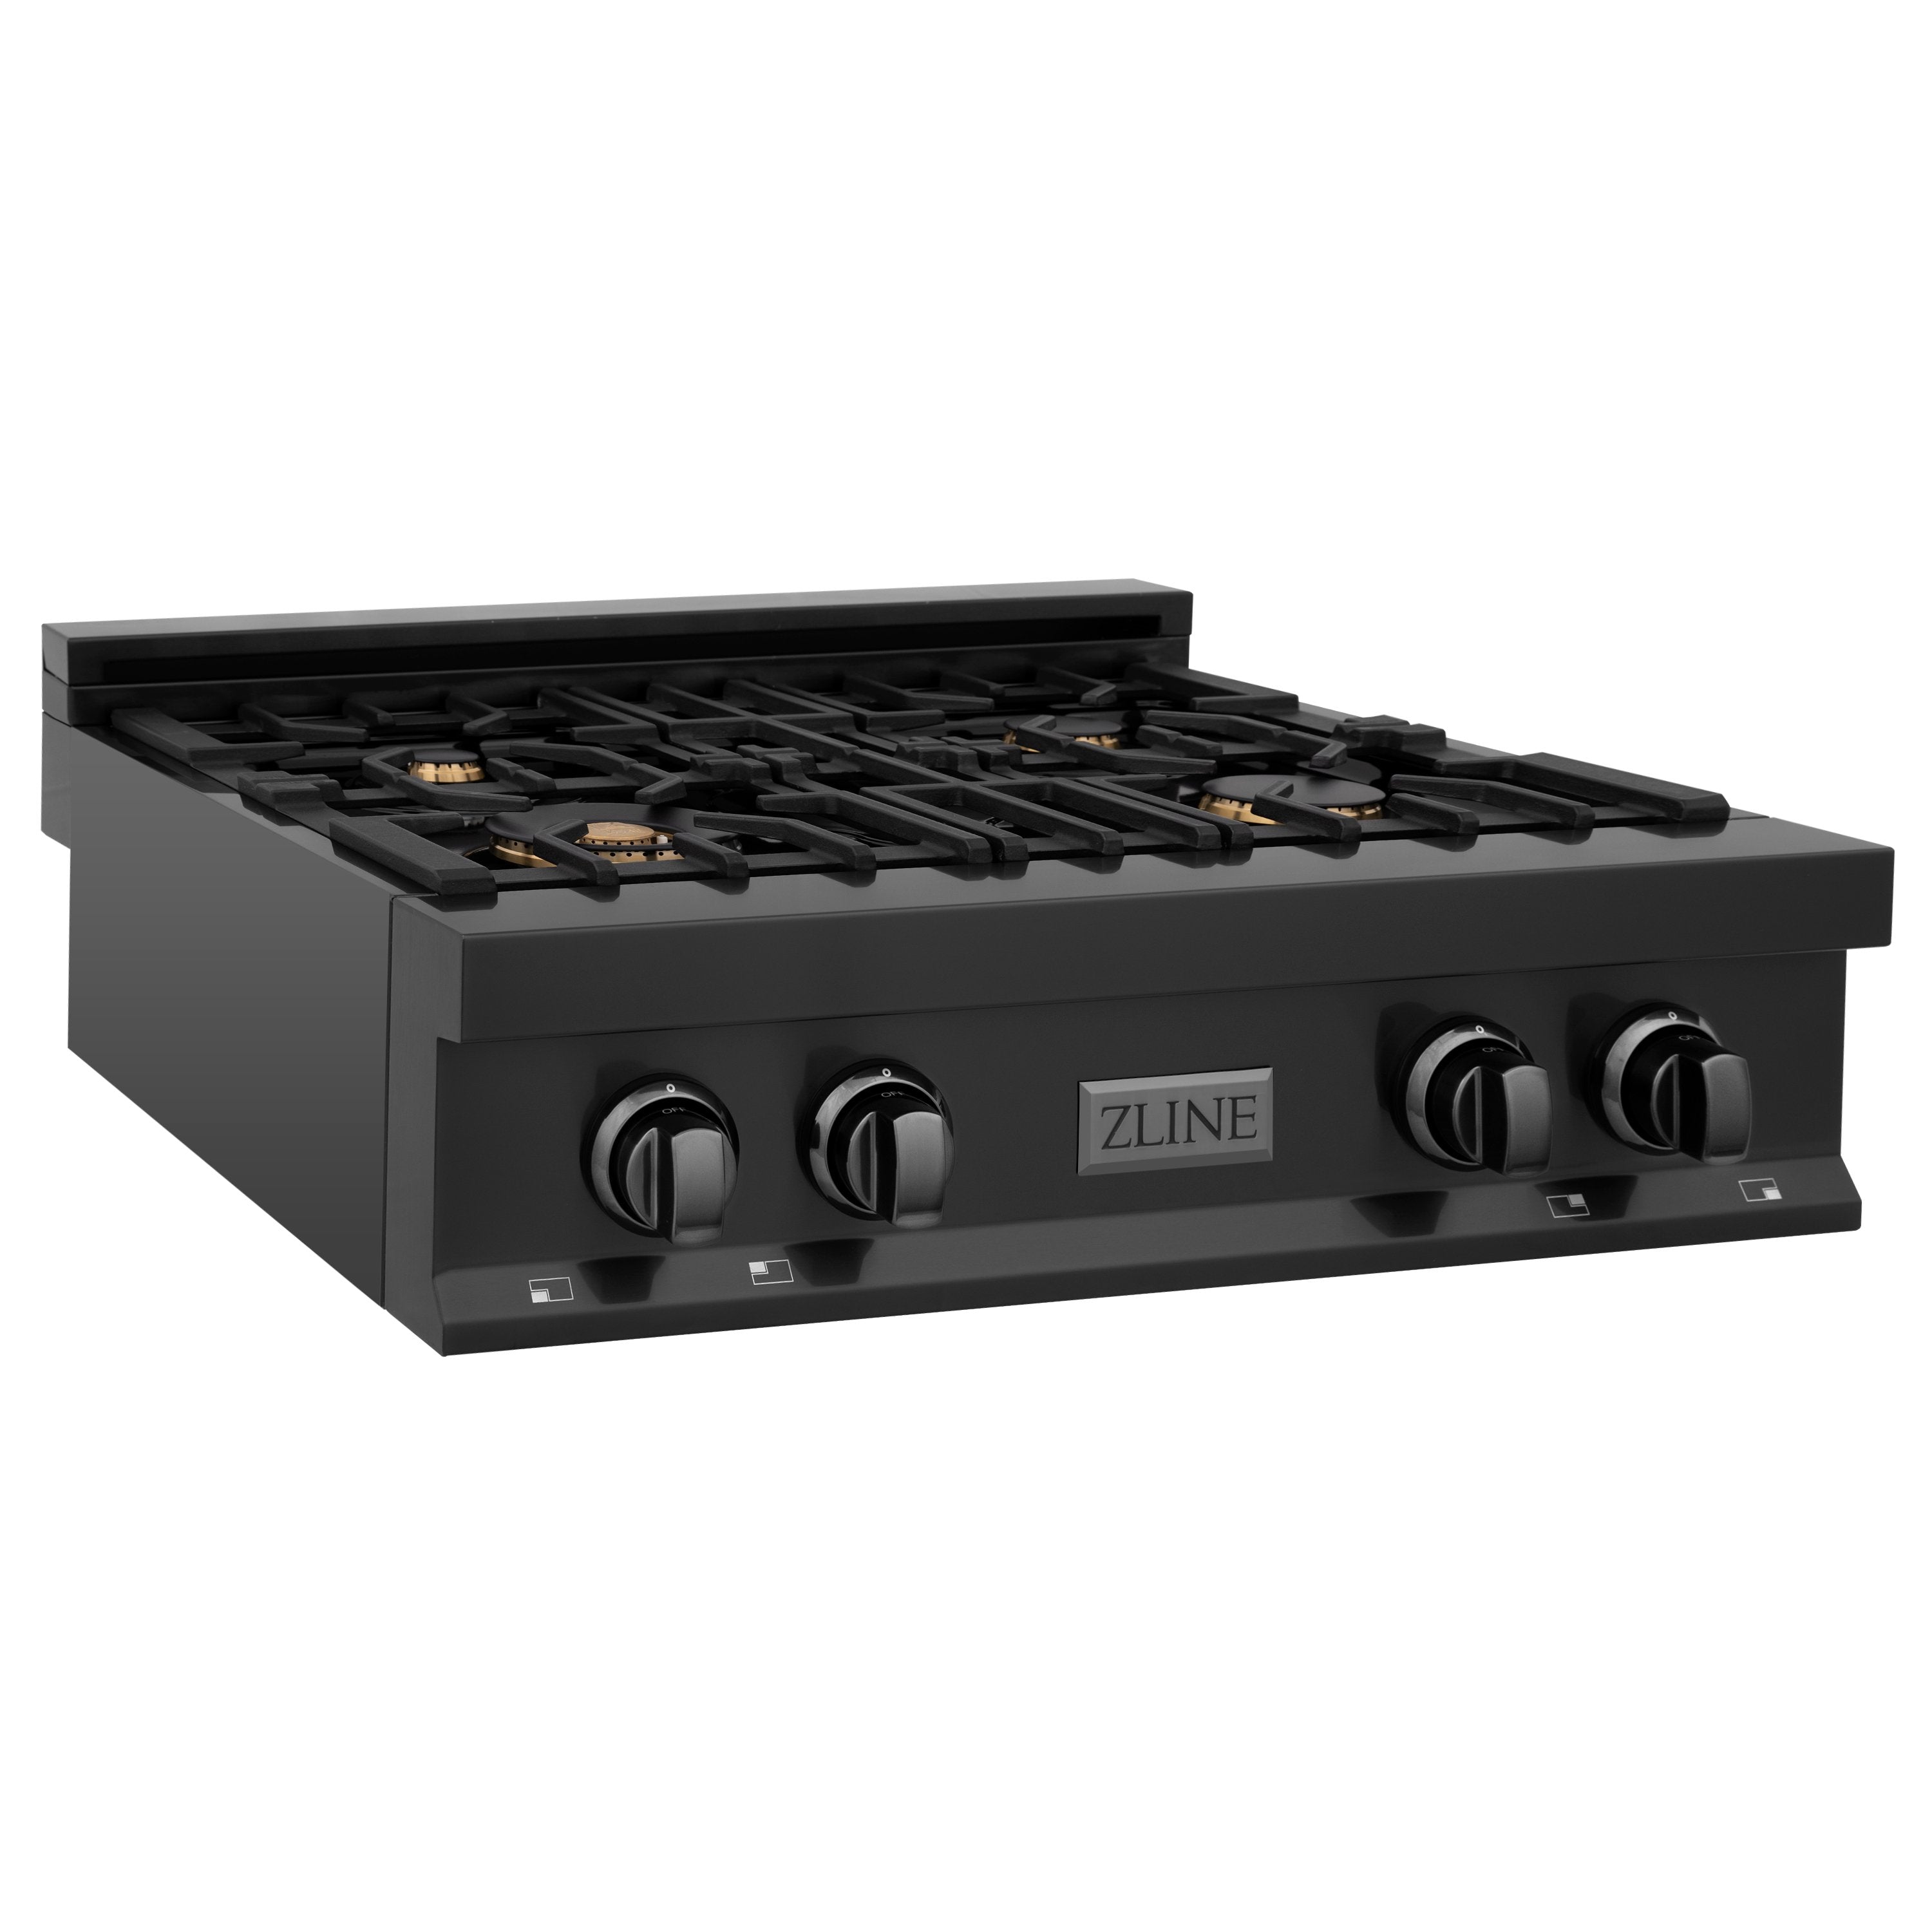 Therangehoodstore.com, ZLINE 30 in. Porcelain Rangetop in Black Stainless with 4 Gas Burners (RTB), RTB-BR-30,